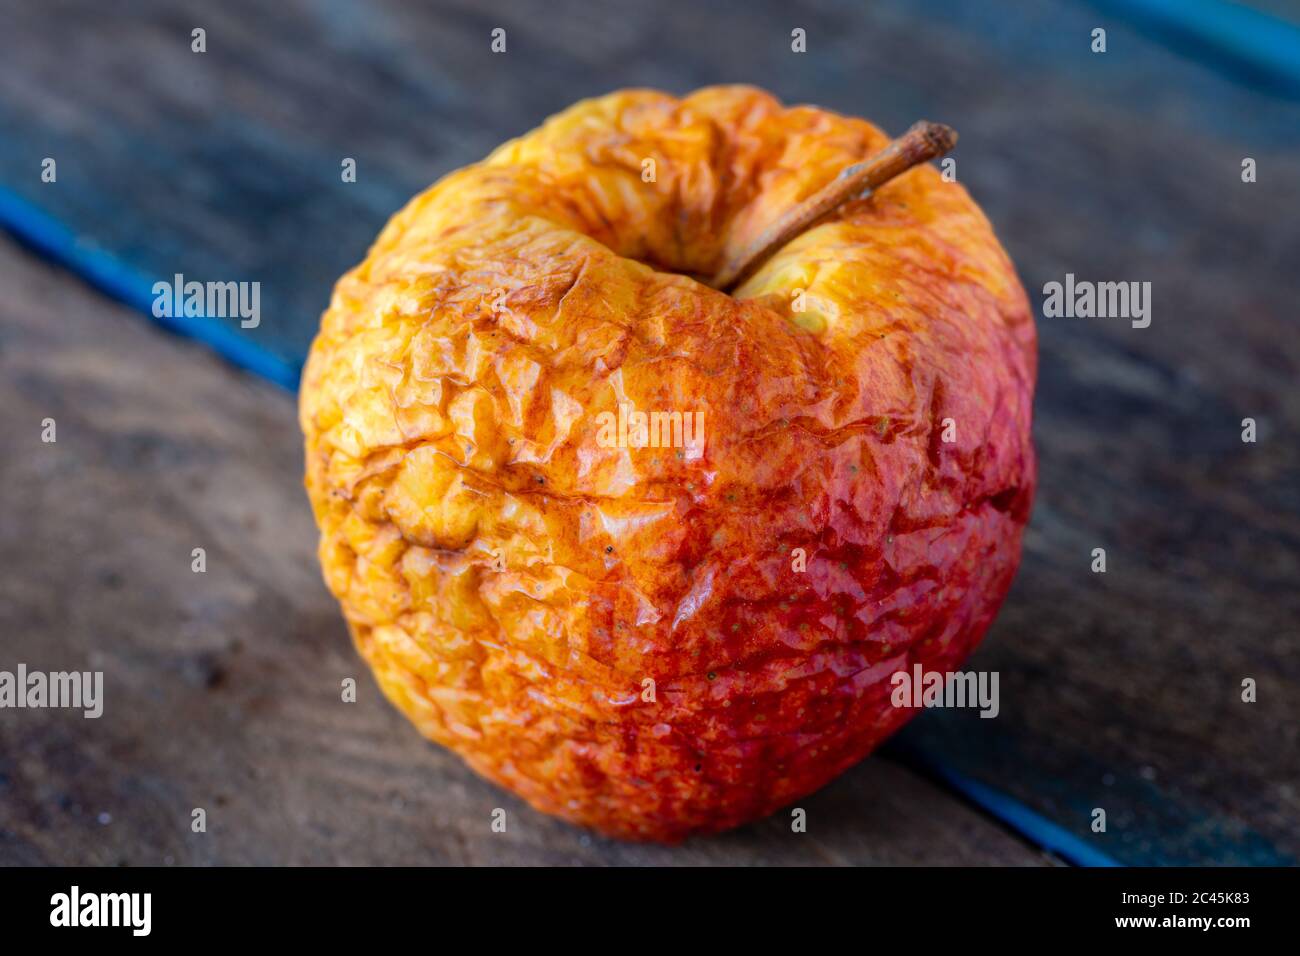 Rotten apple. Spoiled food. Food waste. Apple on old boards. Stock Photo